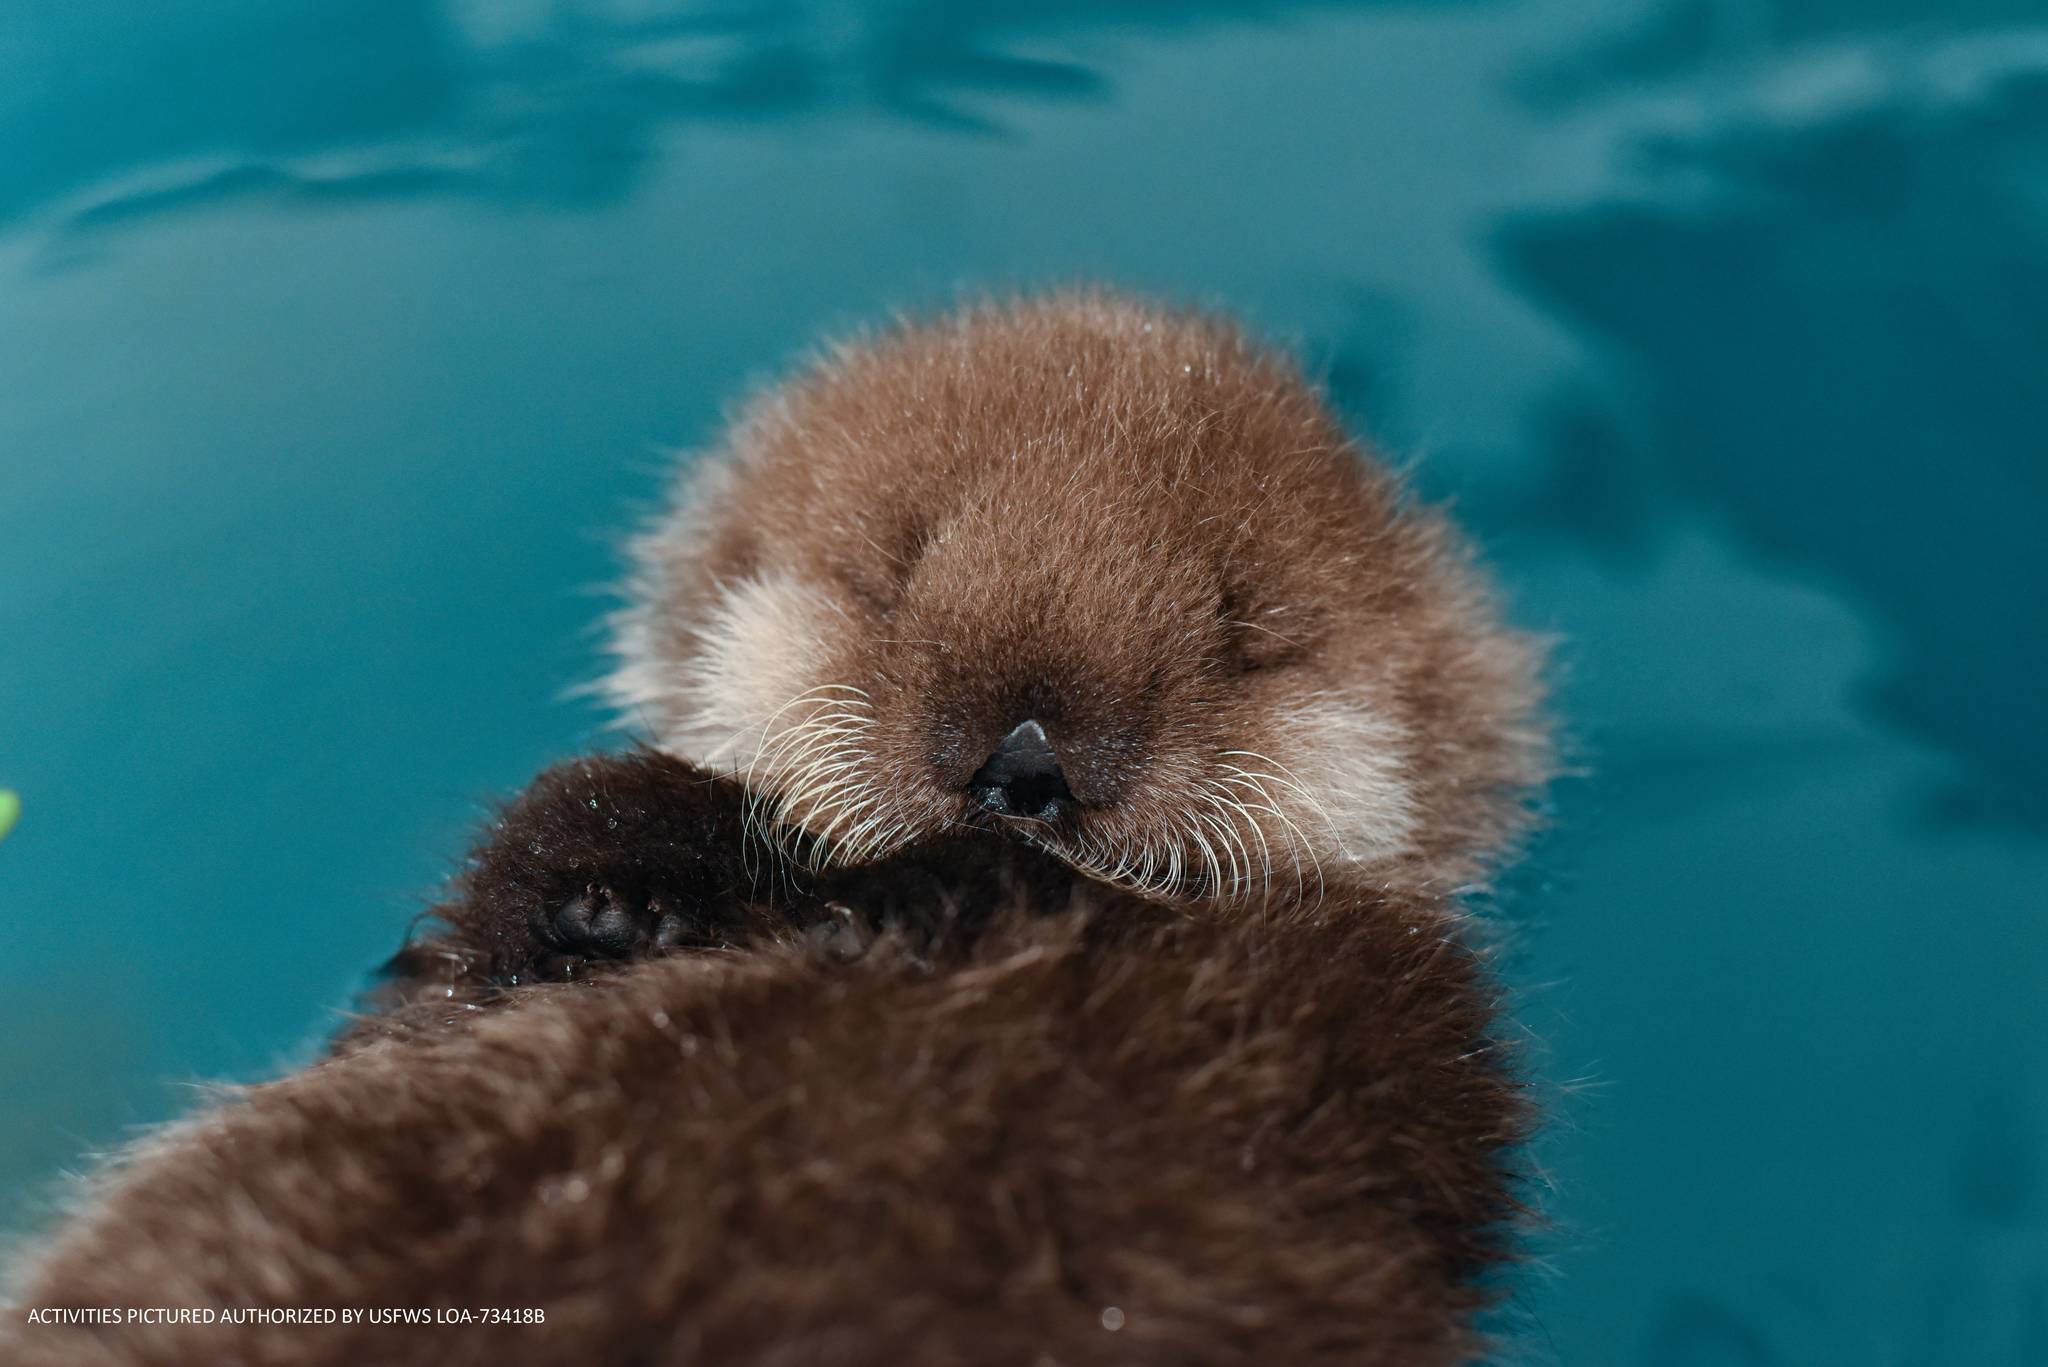 The Alaska SeaLife Center’s newest addition, a male otter pup, is seen here in this undated photo. (Courtesy Alaska SeaLife Center)